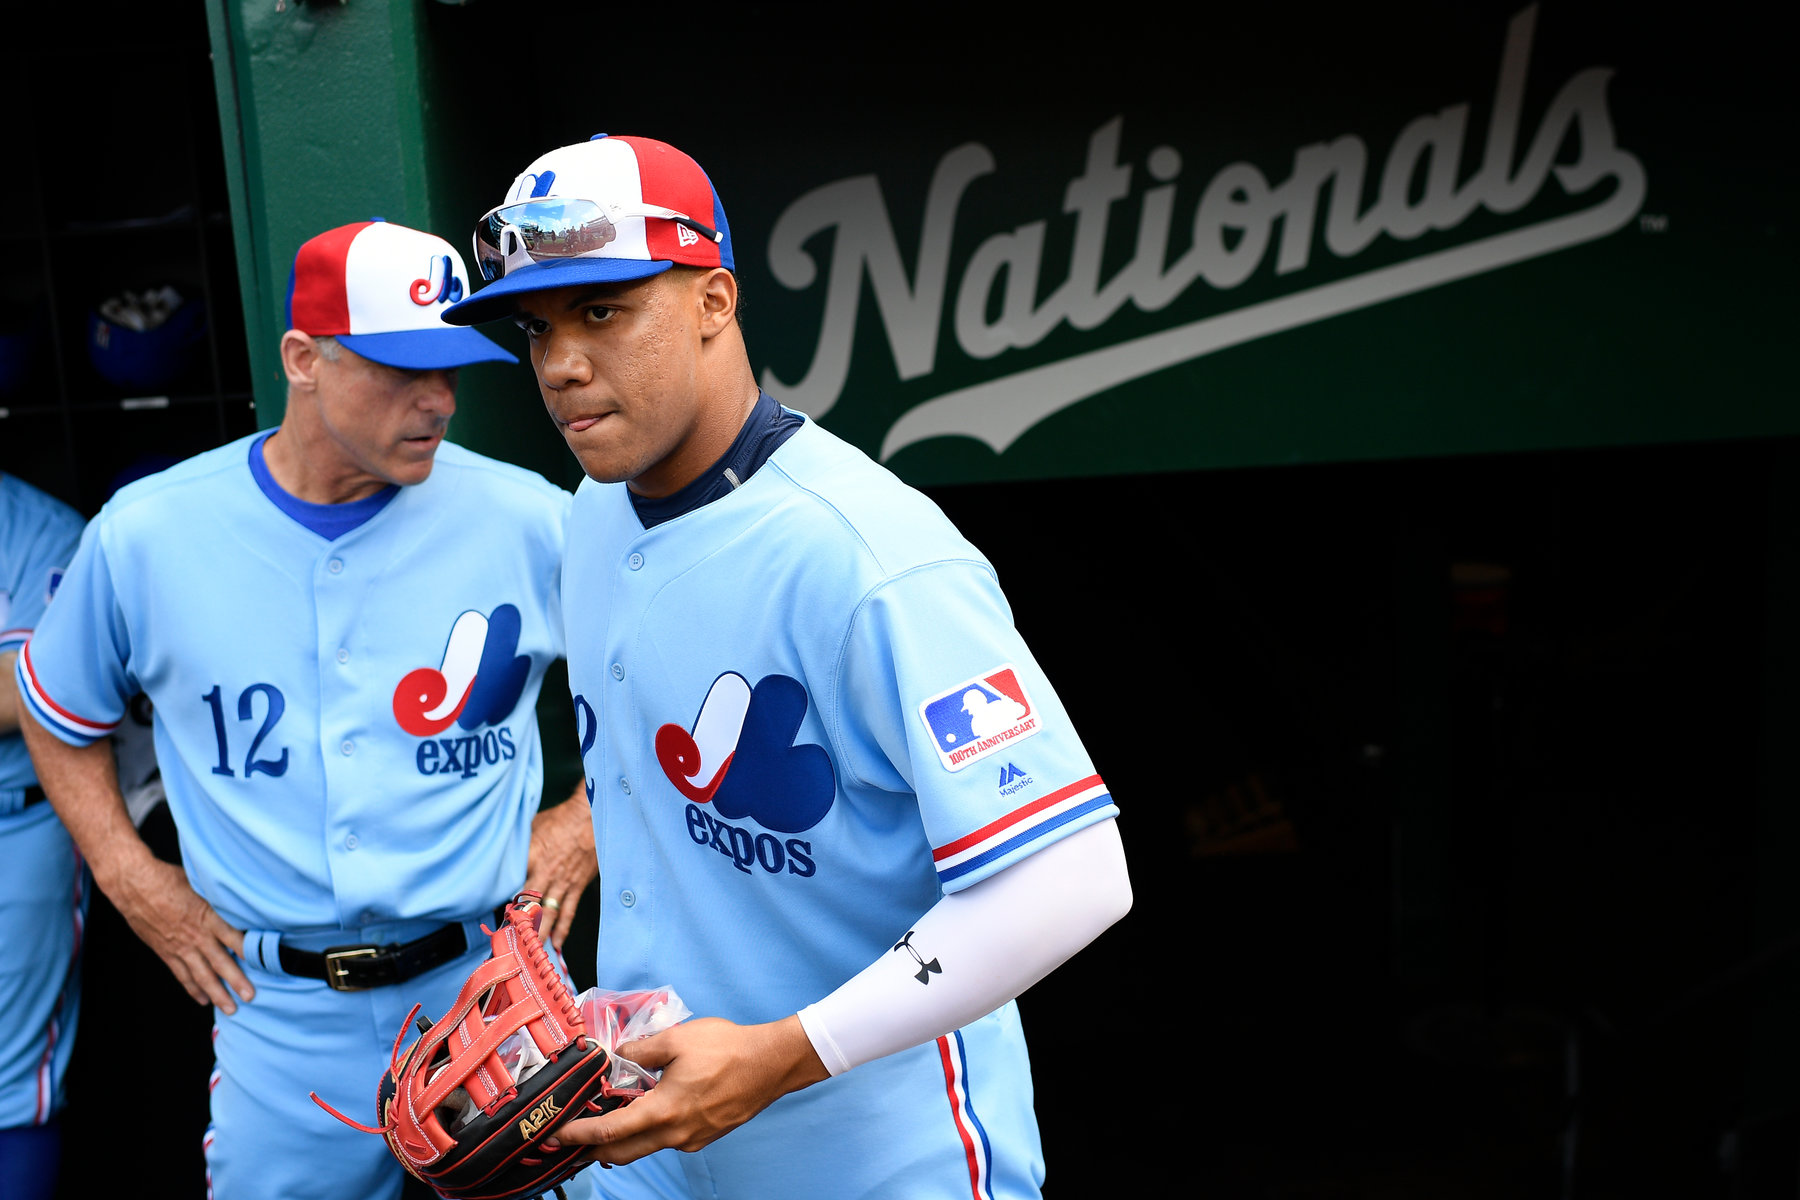 The Luckless Expos Gave Birth to the Nationals, and a Lot More